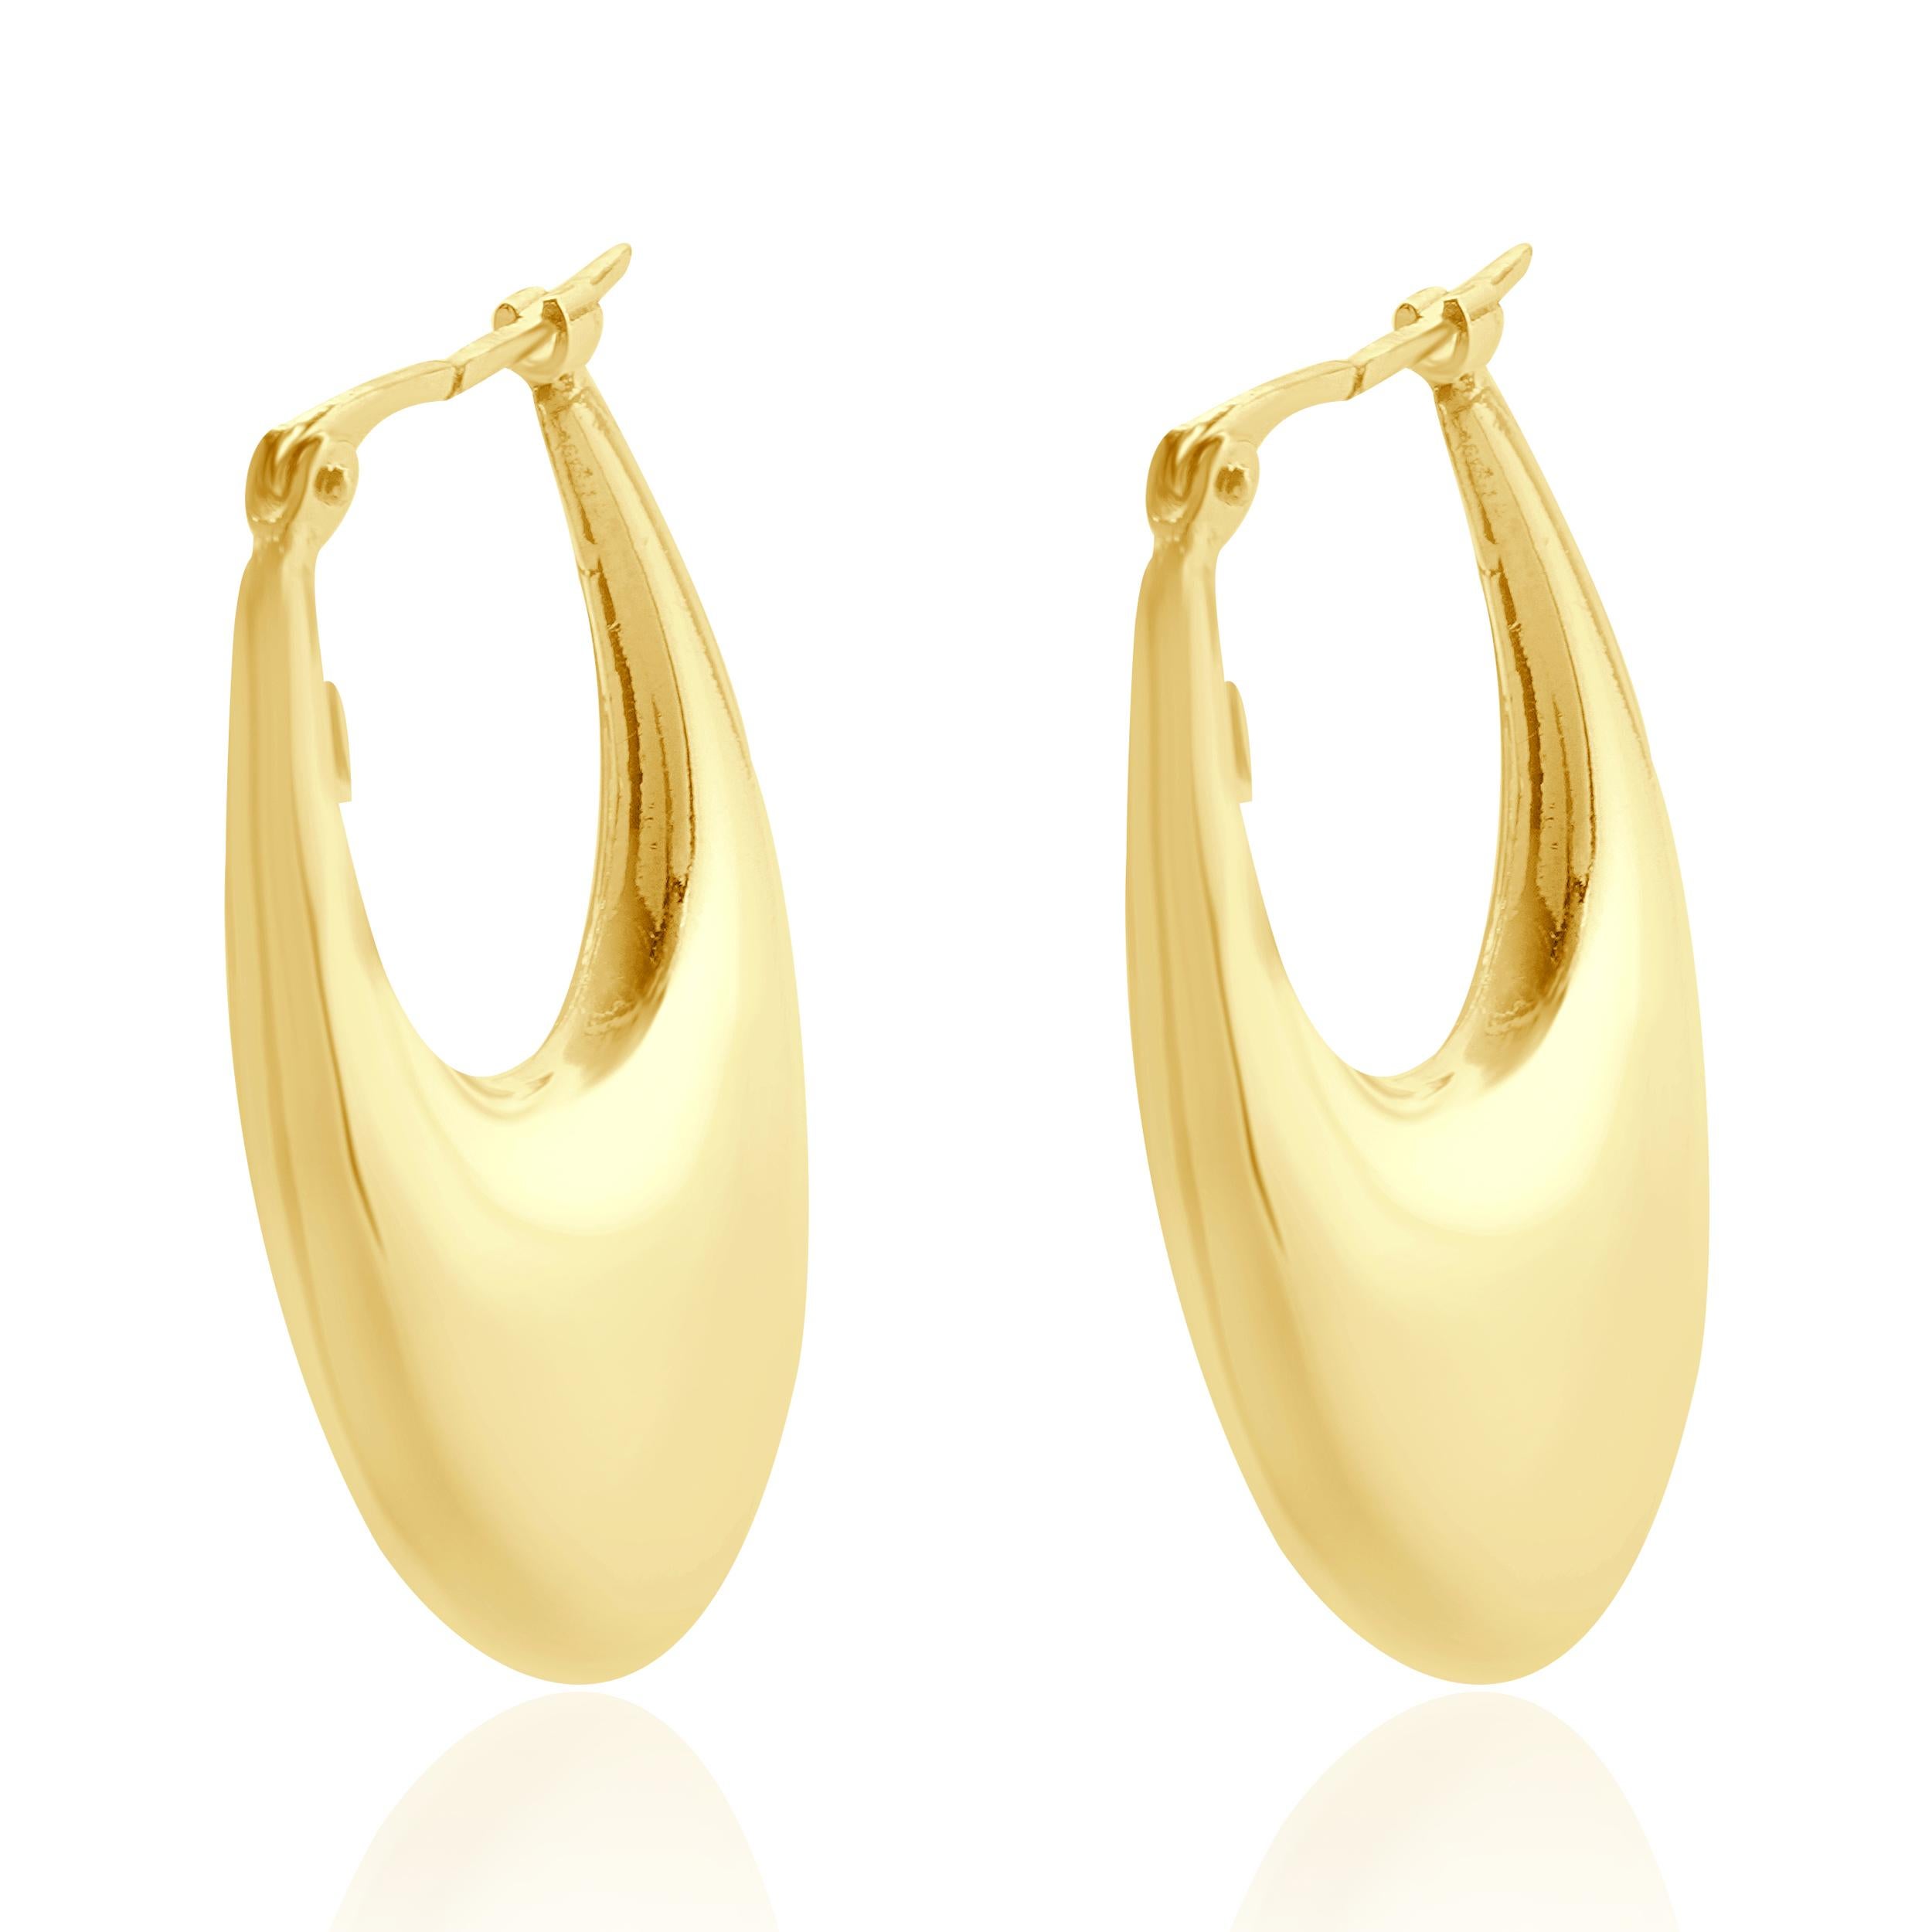 Designer: Uno Aerre
Material: 18K yellow gold 
Dimensions: earrings measure 26.5 x 18.5mm
Weight: 3.40 grams